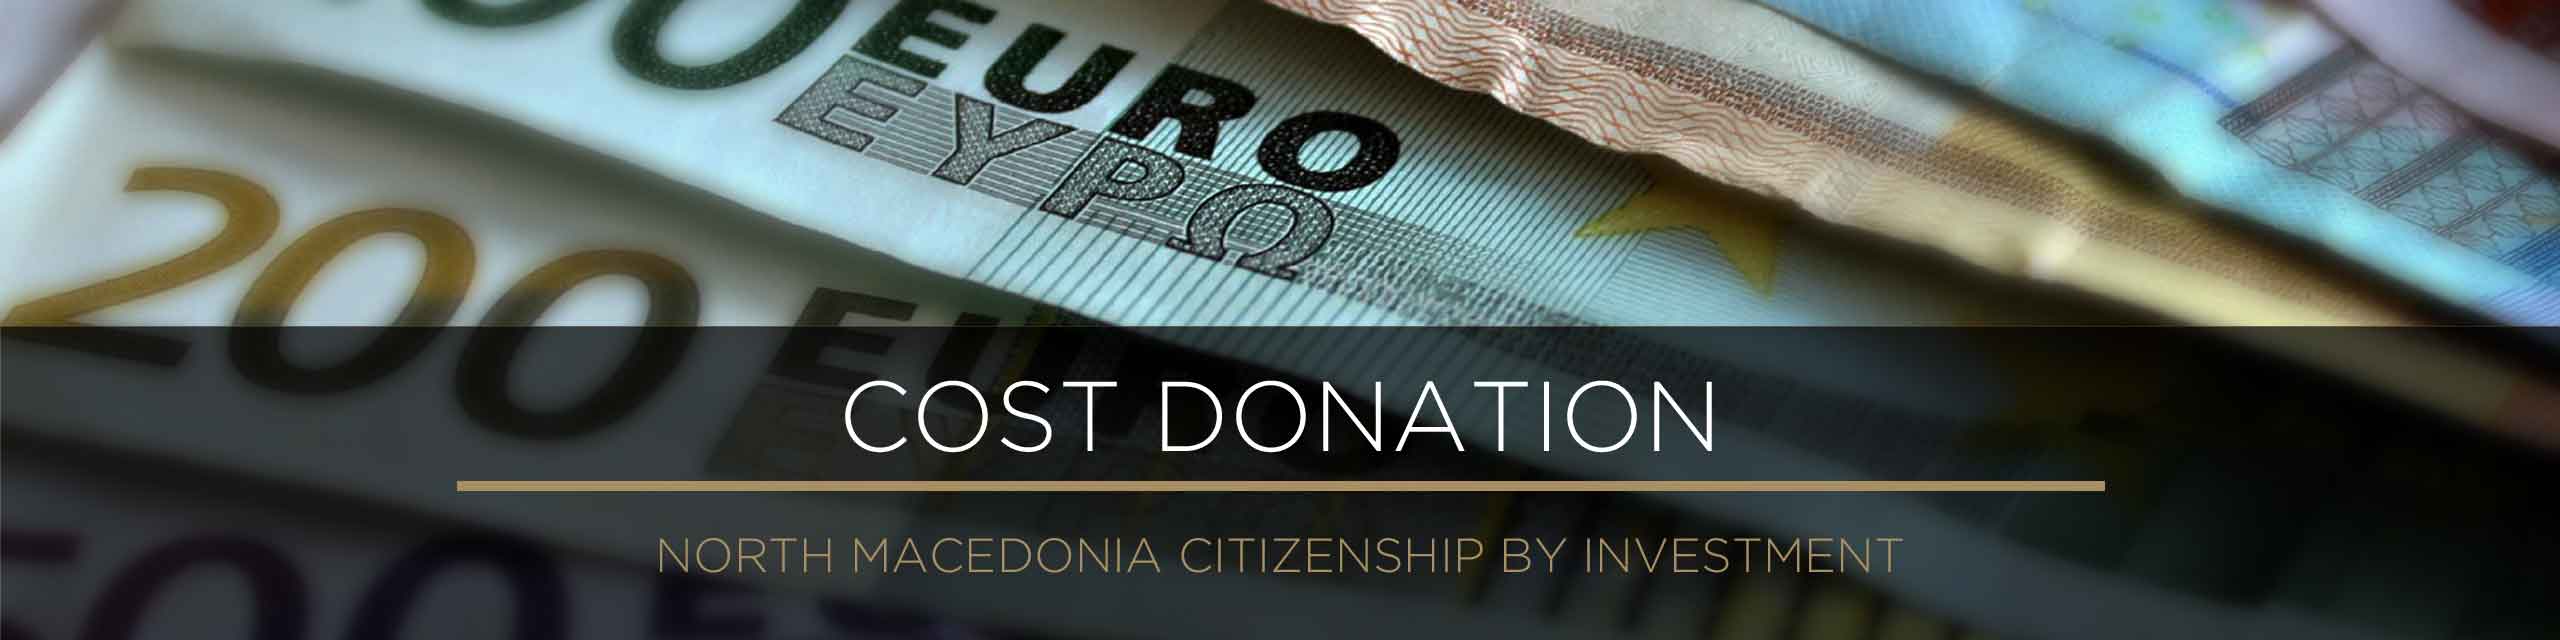 Costs of North Macedonia Citizenship by Investment Program